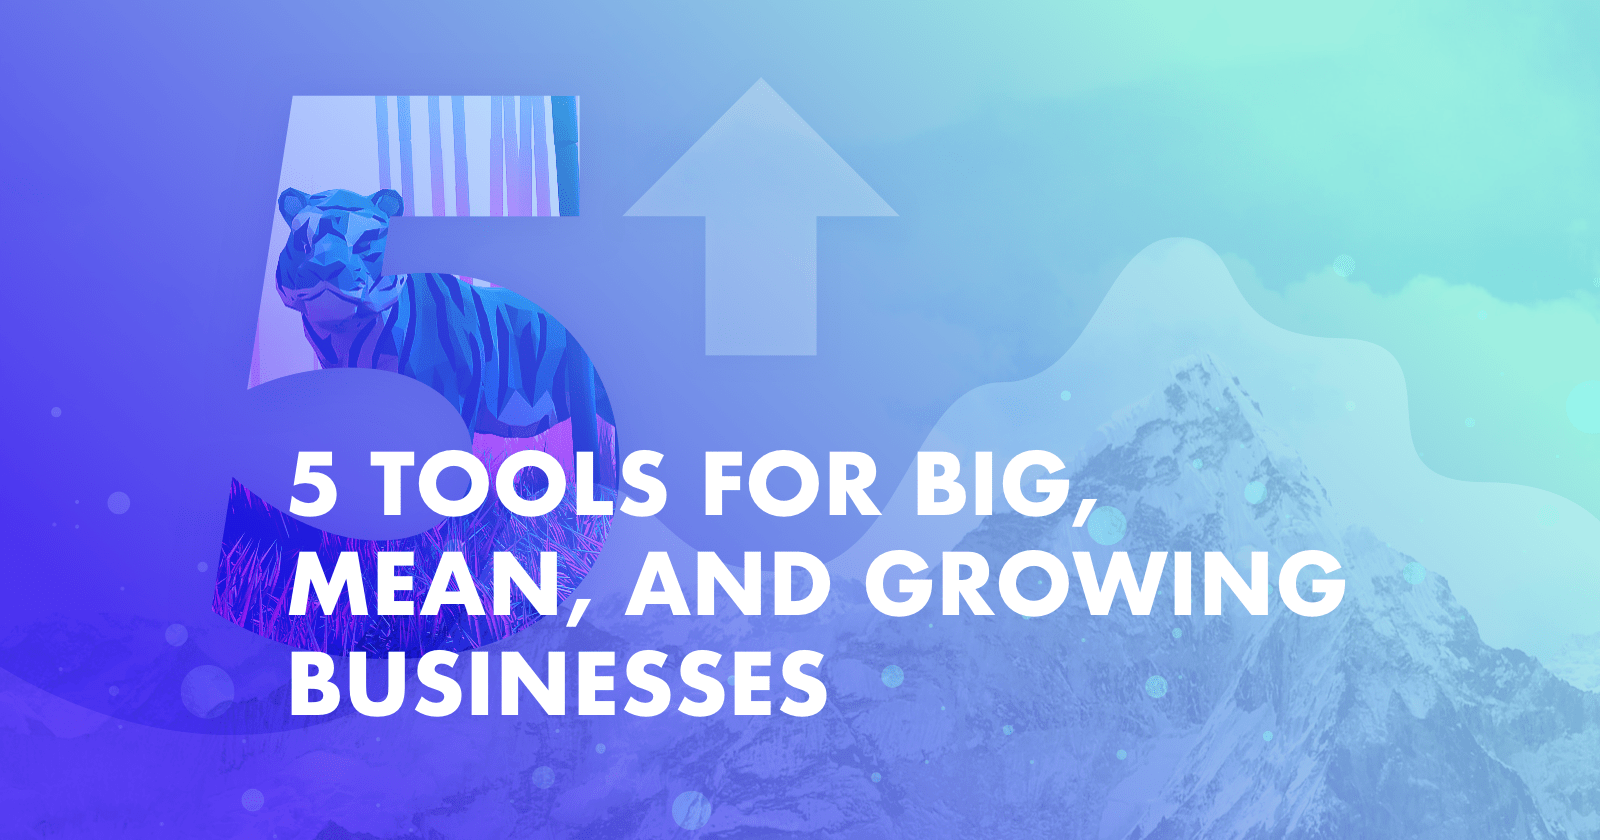 Tools for Big Businesses